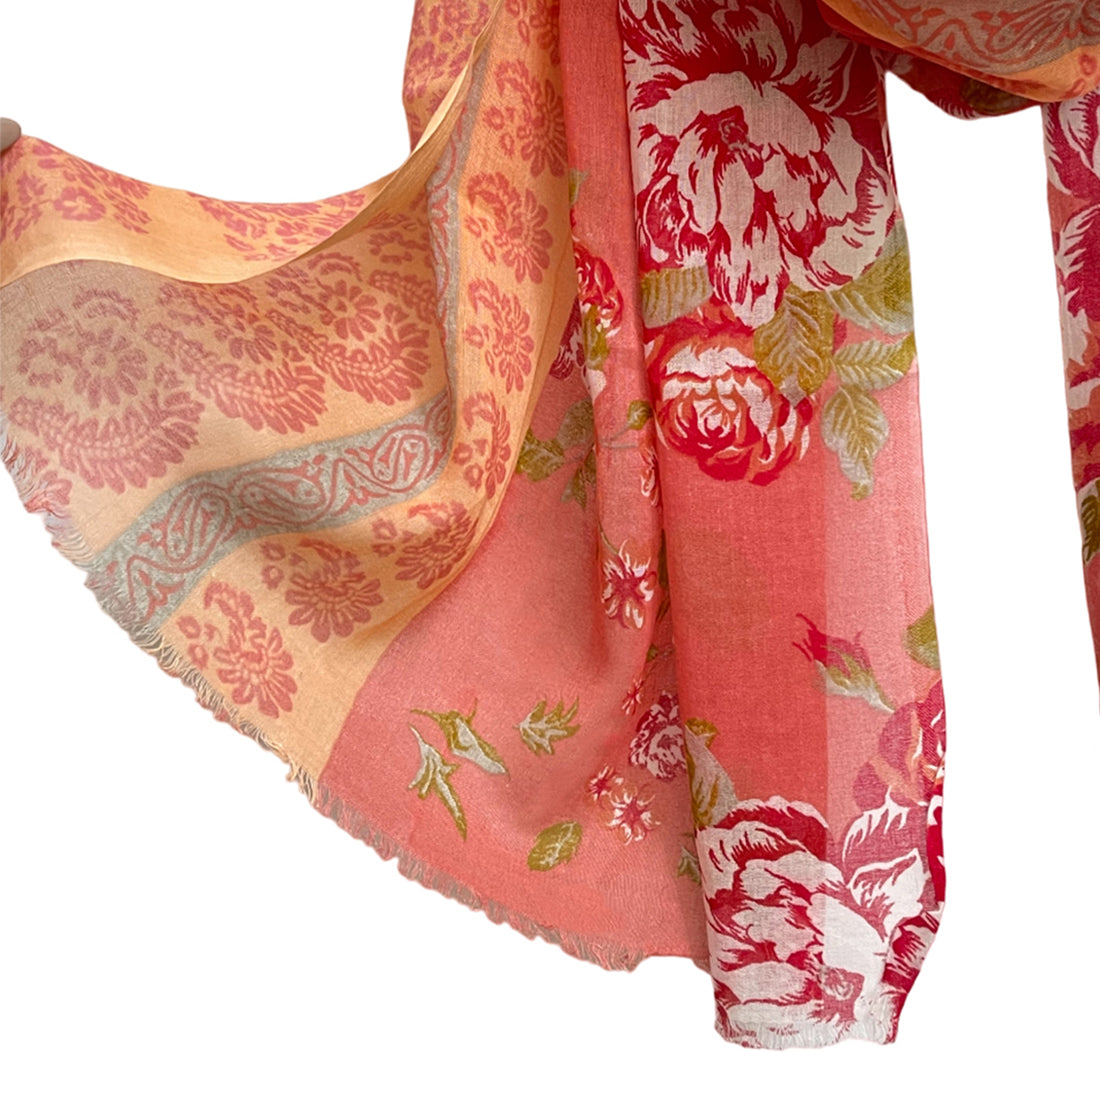 Orange & White Double Shaded Abstract Rose Floral & Motifs Printed Viscose Scarf